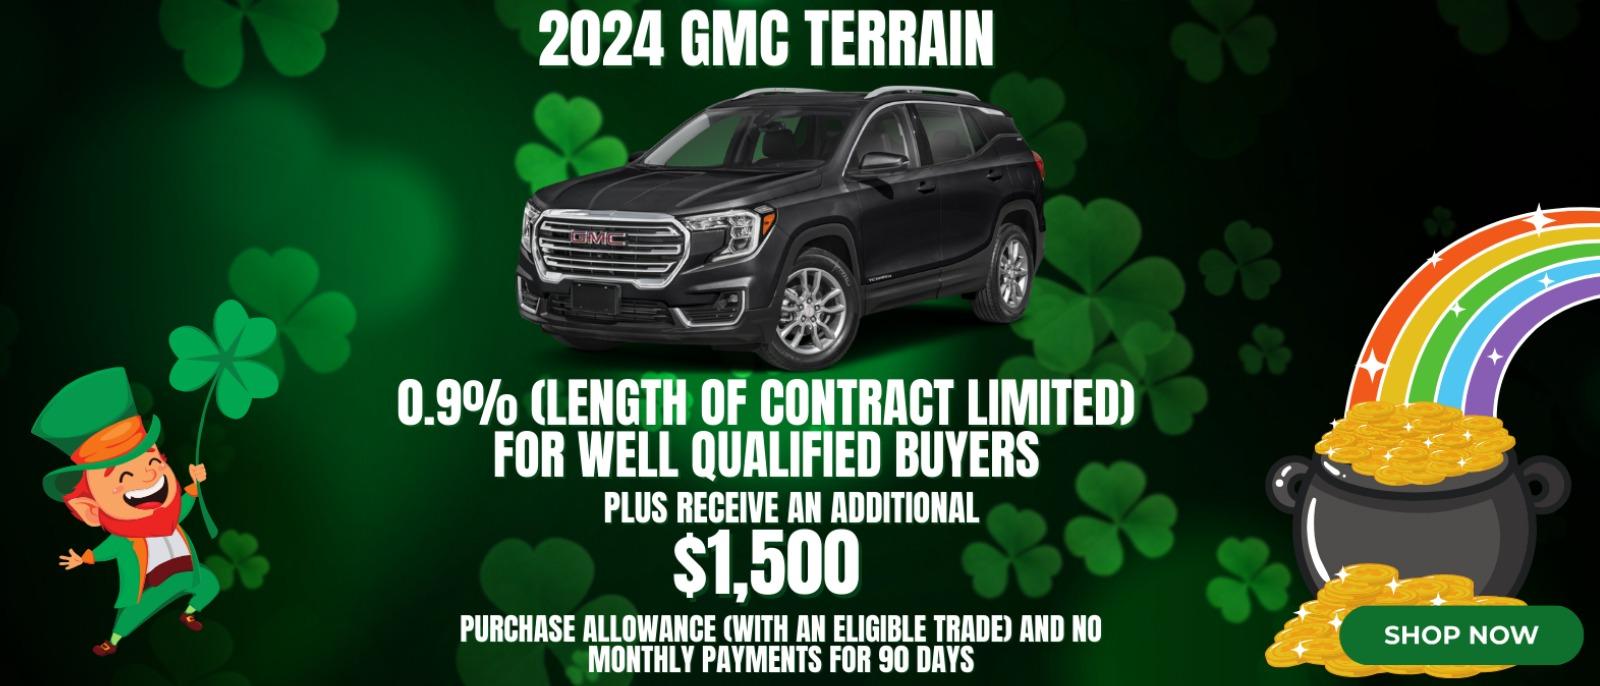 2024 GMC Terrain
0.9% APR (length of contract limited) for well qualified buyers when you finance with GM financial
Plus receive an additional $1,500 purchase allowance and no monthly payments for 90 days.